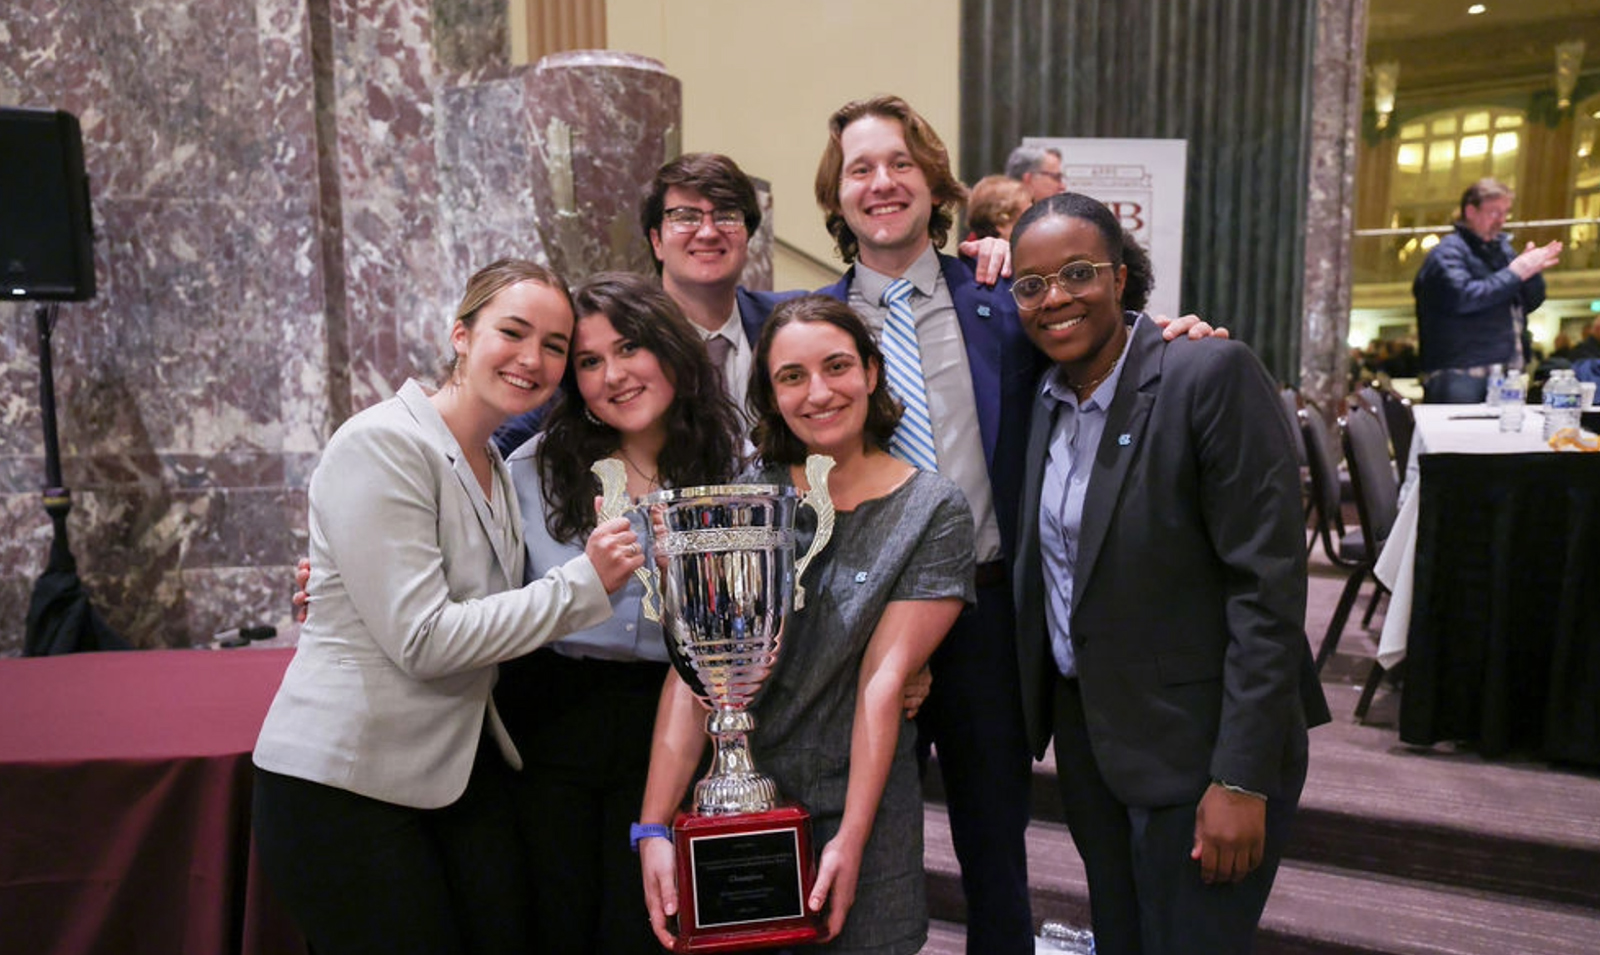 Six members of the UNC Ethics Bowl team posing with award in hands.